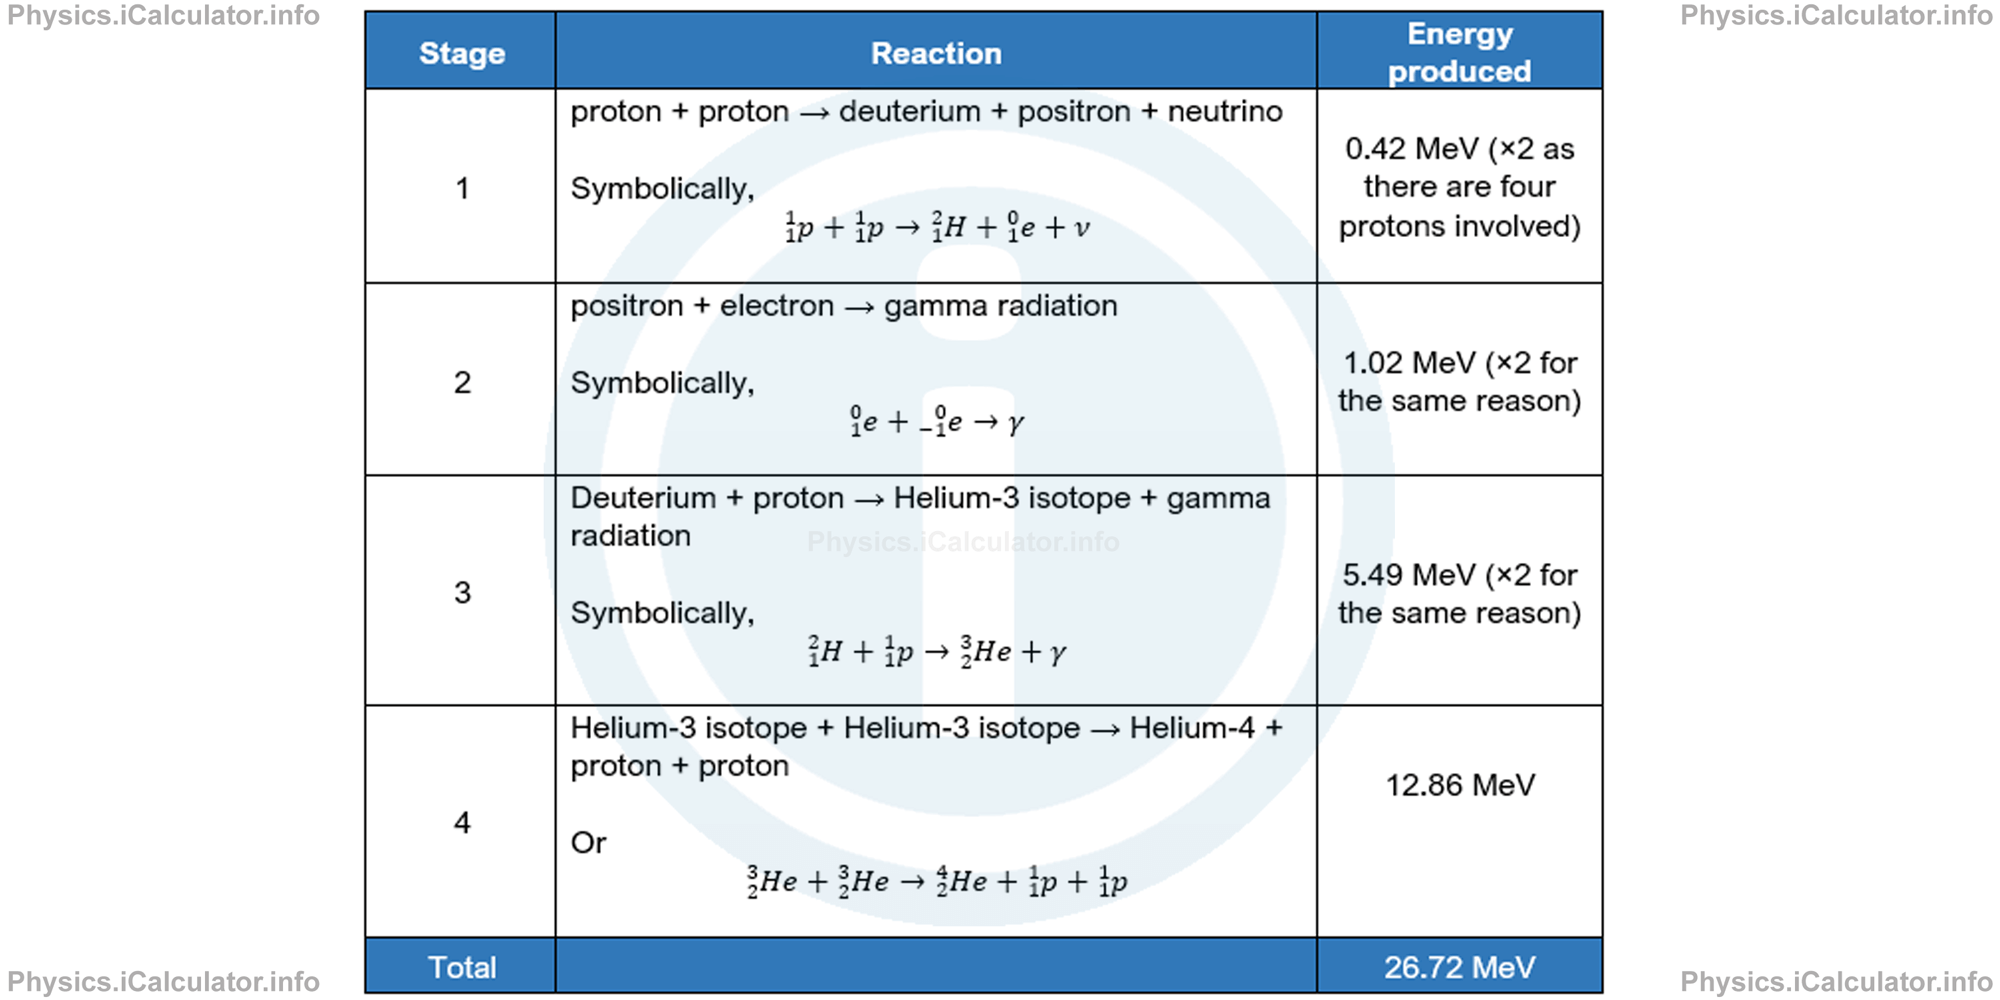 Physics Tutorials: This image provides visual information for the physics tutorial Nuclear Reactions 